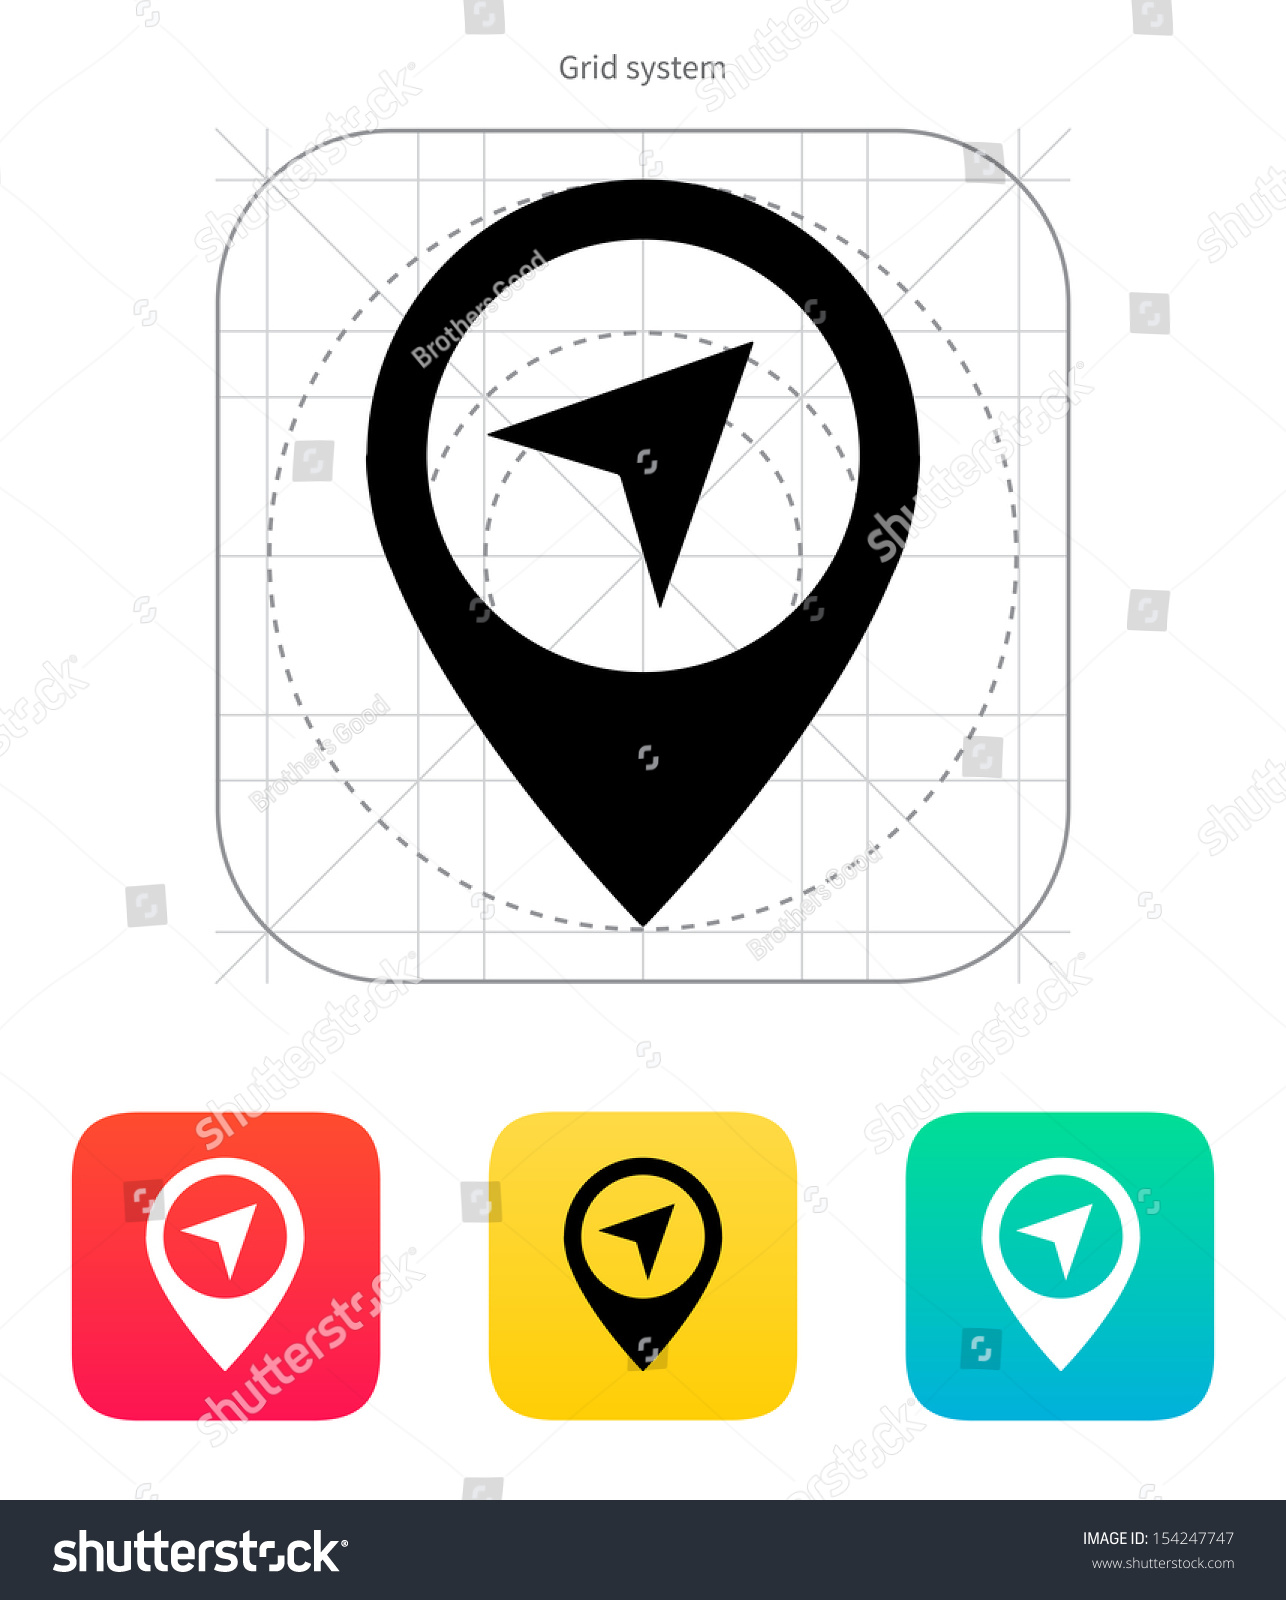 Point Icon On White Background. Vector Illustration. - 154247747